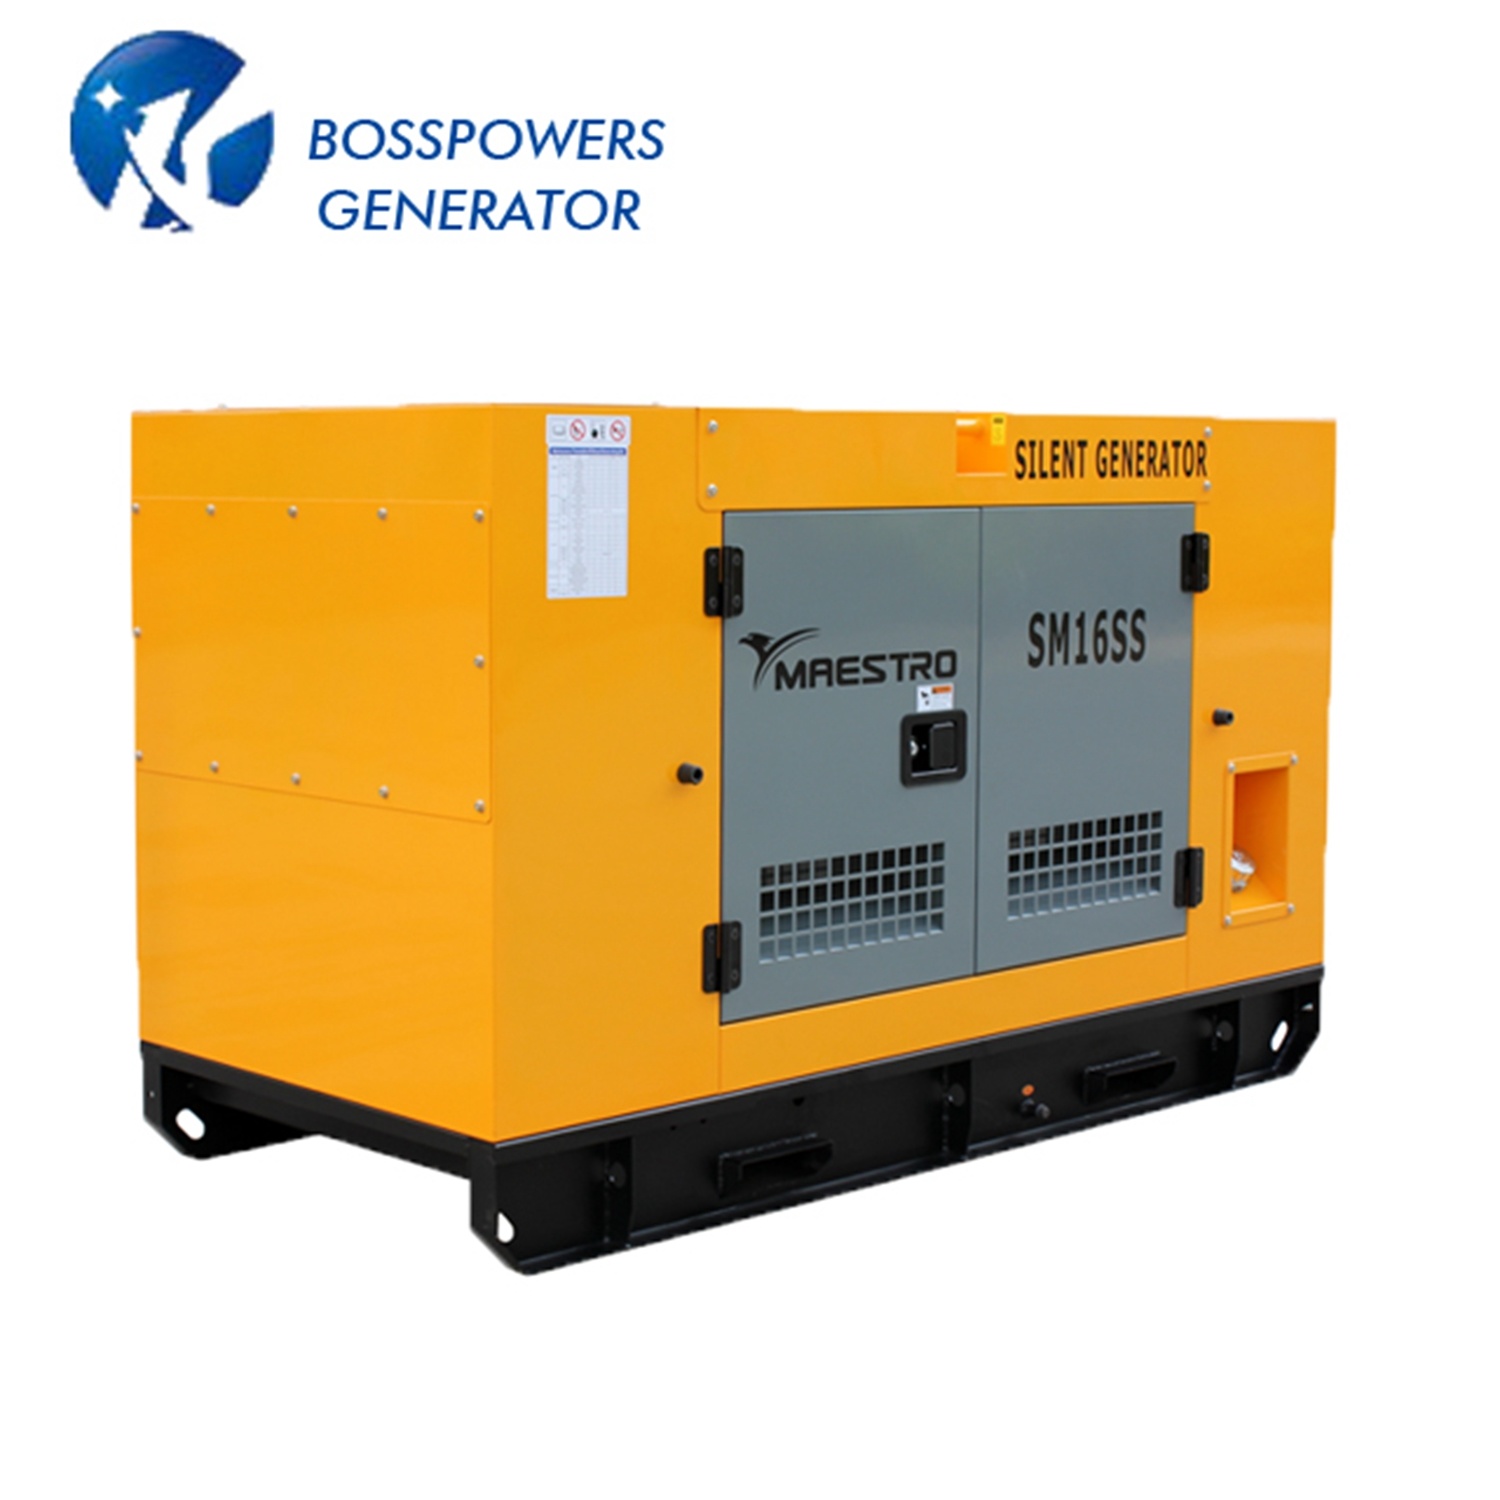 Silent Diesel Generator Powered by Doosan P126ti with Co/Form-E